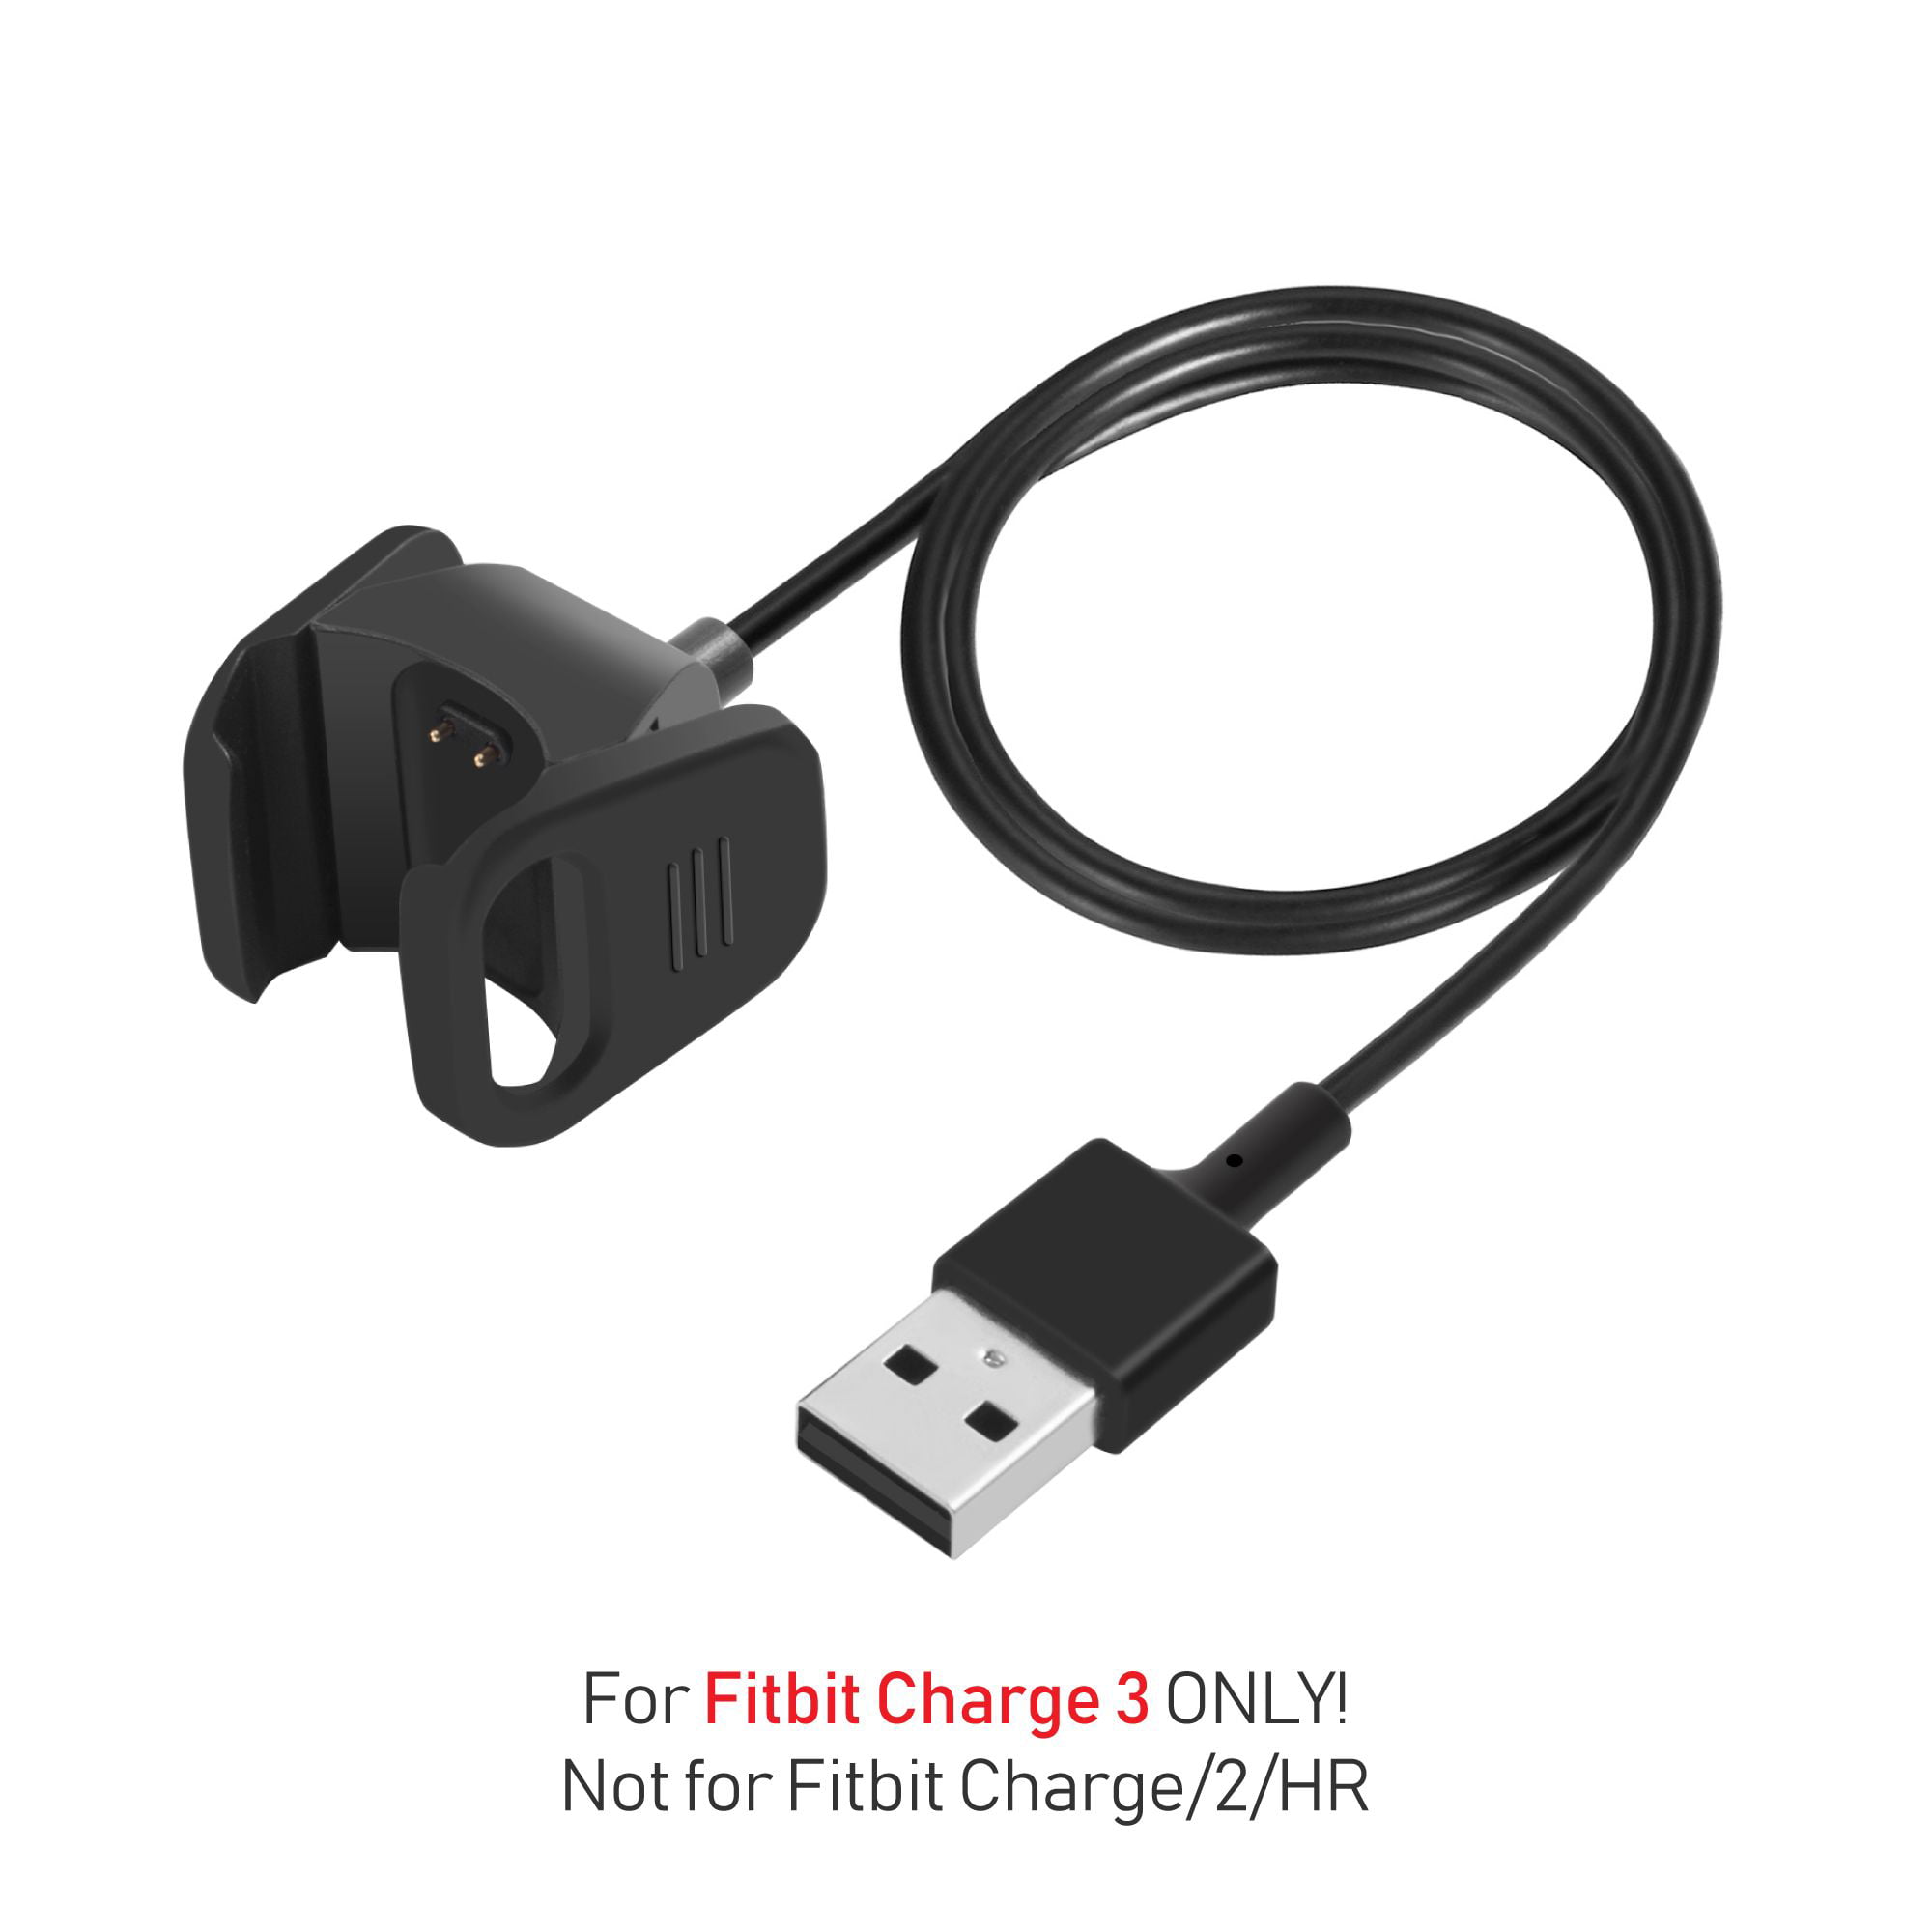 Fitbit Charging Cable for Charge 3 Activity Tracker FREE SHIP 